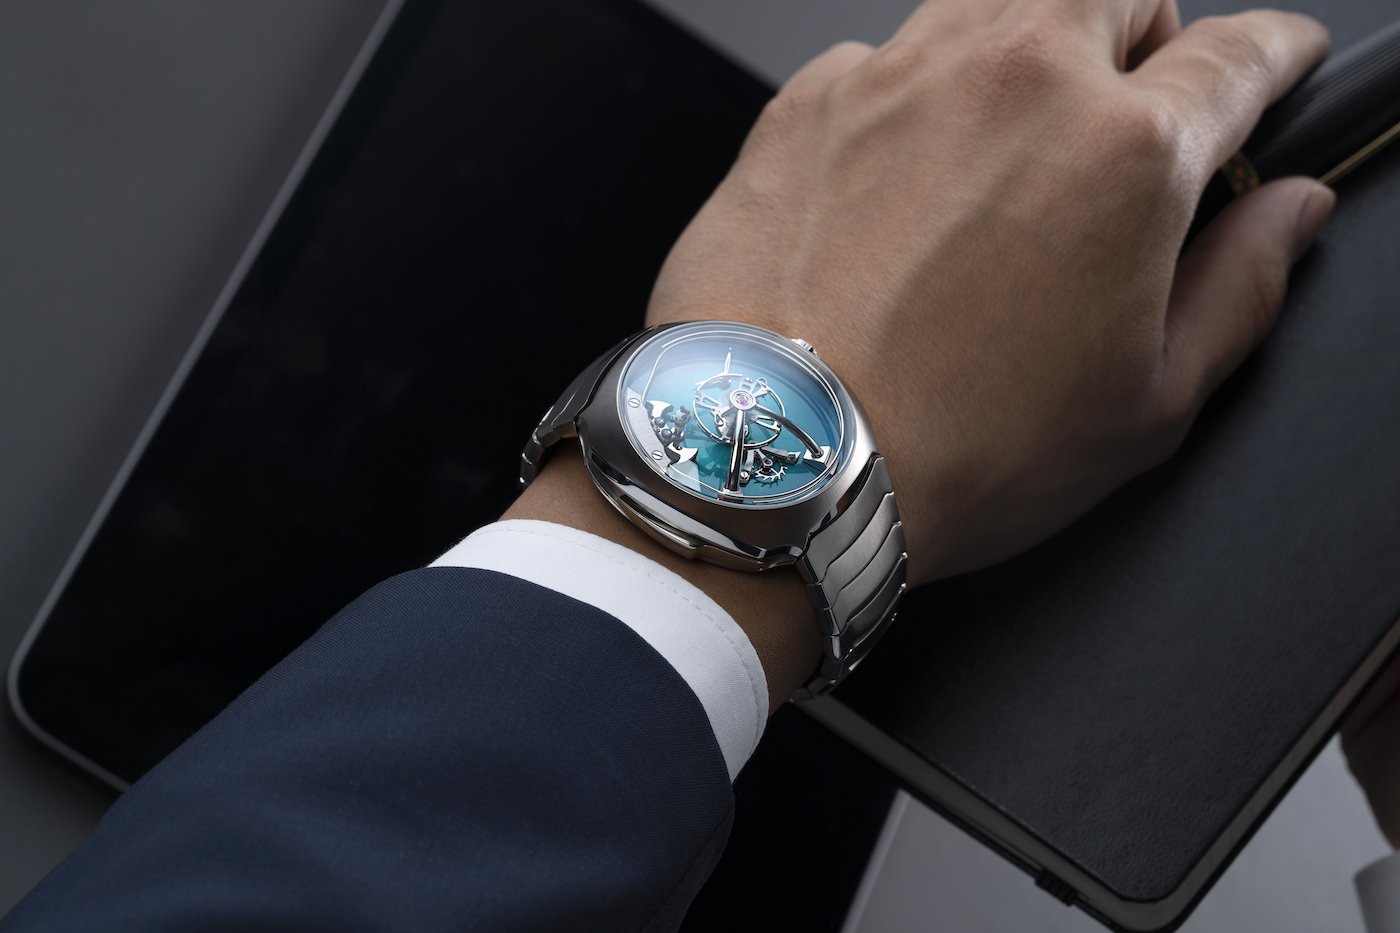 H. Moser & Cie. and MB&F join creative forces again for Only Watch